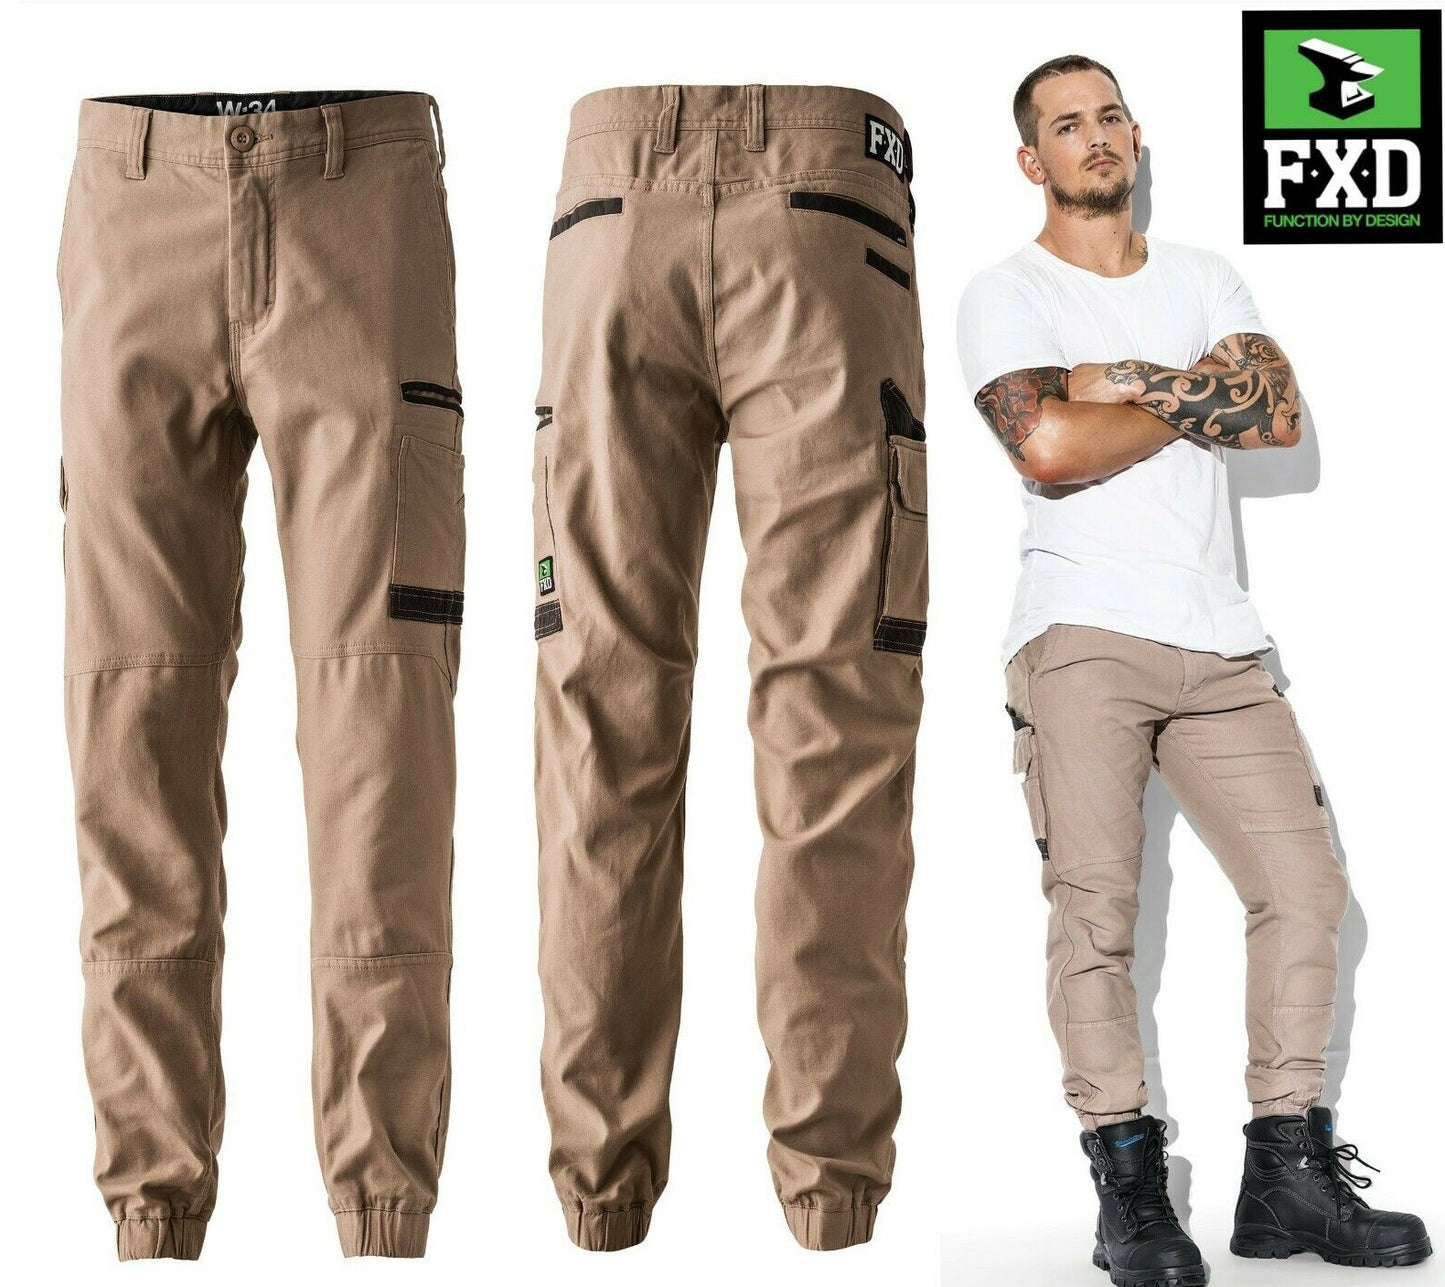 FXD Trousers WP-4 Duratech Cuffed Work Cargo Combat Multi Pocket Workwear 30-38